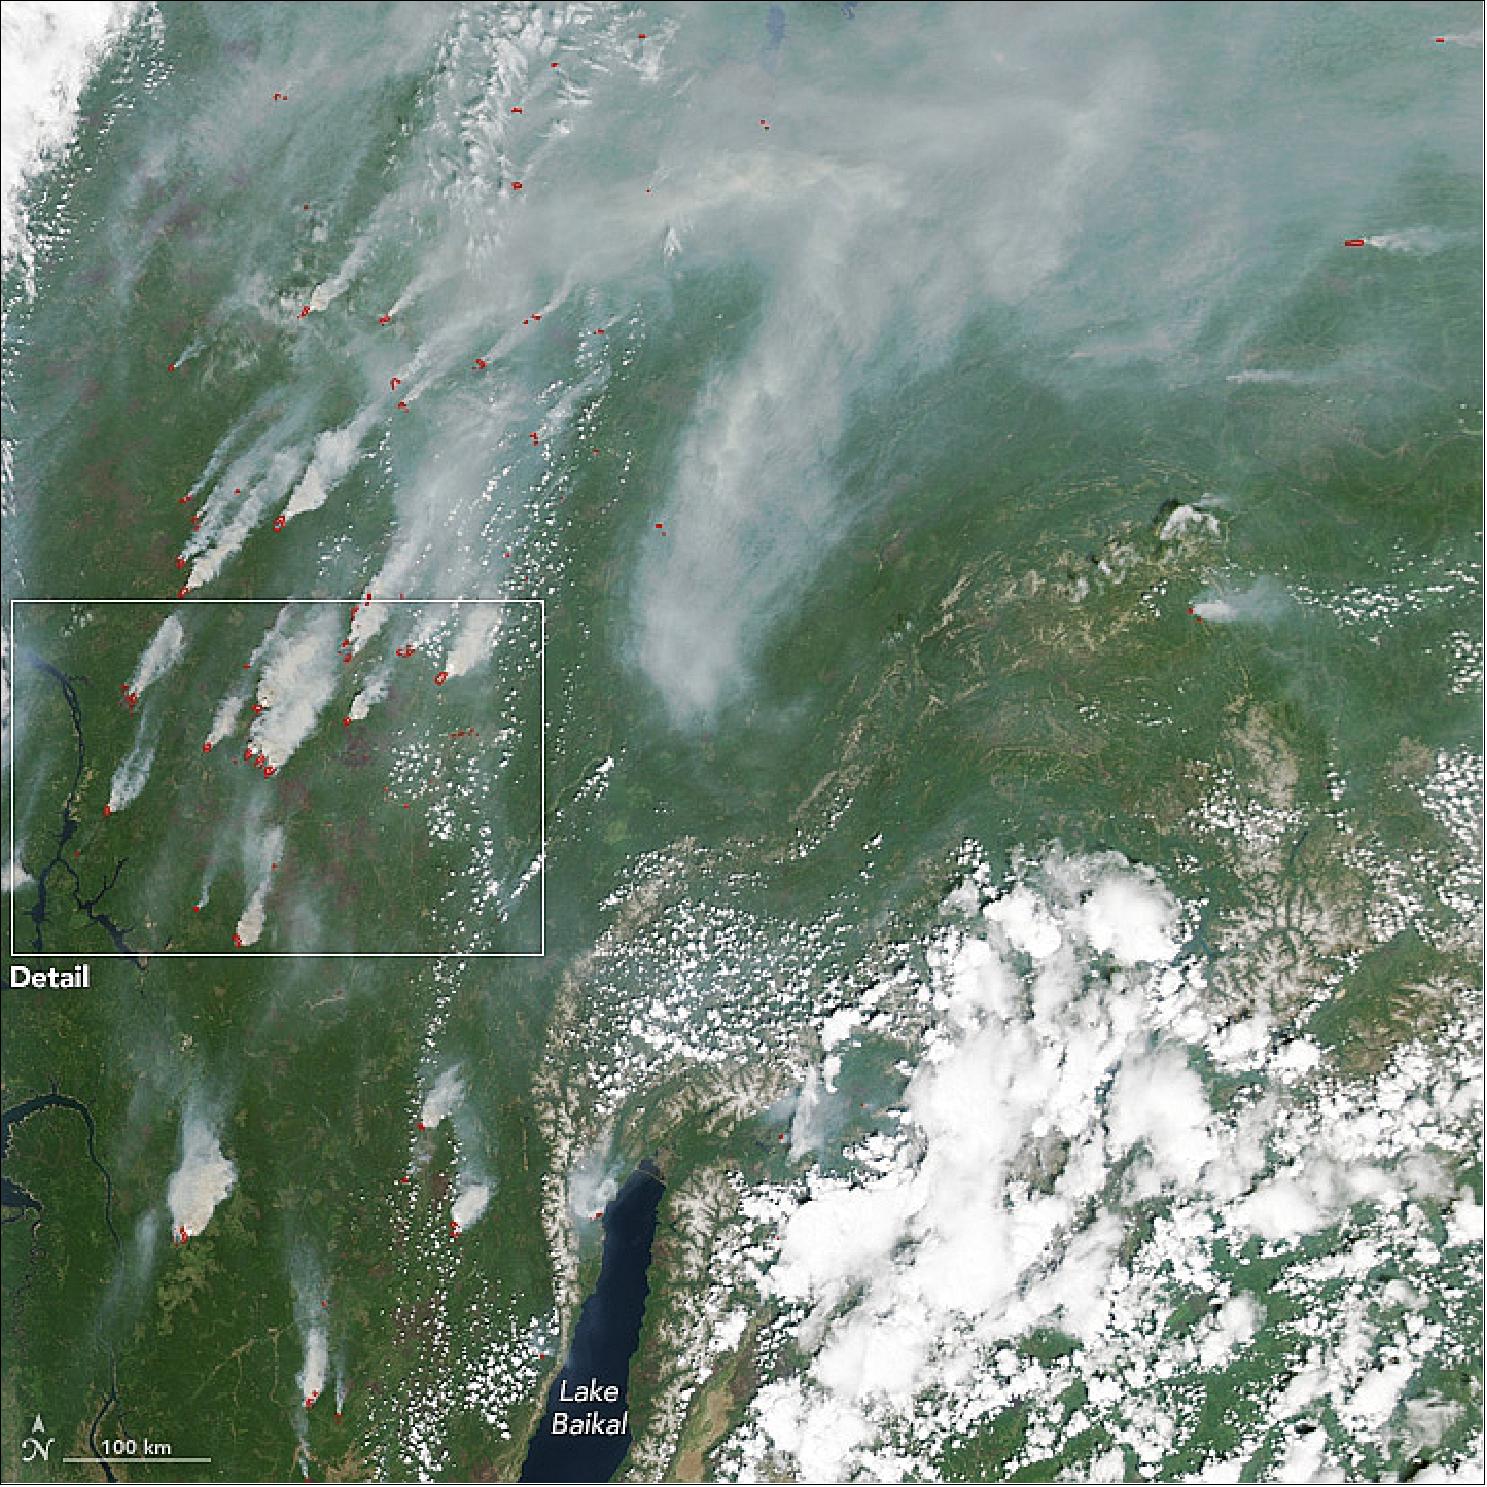 Figure 100: On June 22, 2017, MODIS acquired this natural color image of fires near Lake Baikal and the Angara River (image credit: NASA Earth observatory, image by Jeff Schmaltz, story by Mike Carlowicz)